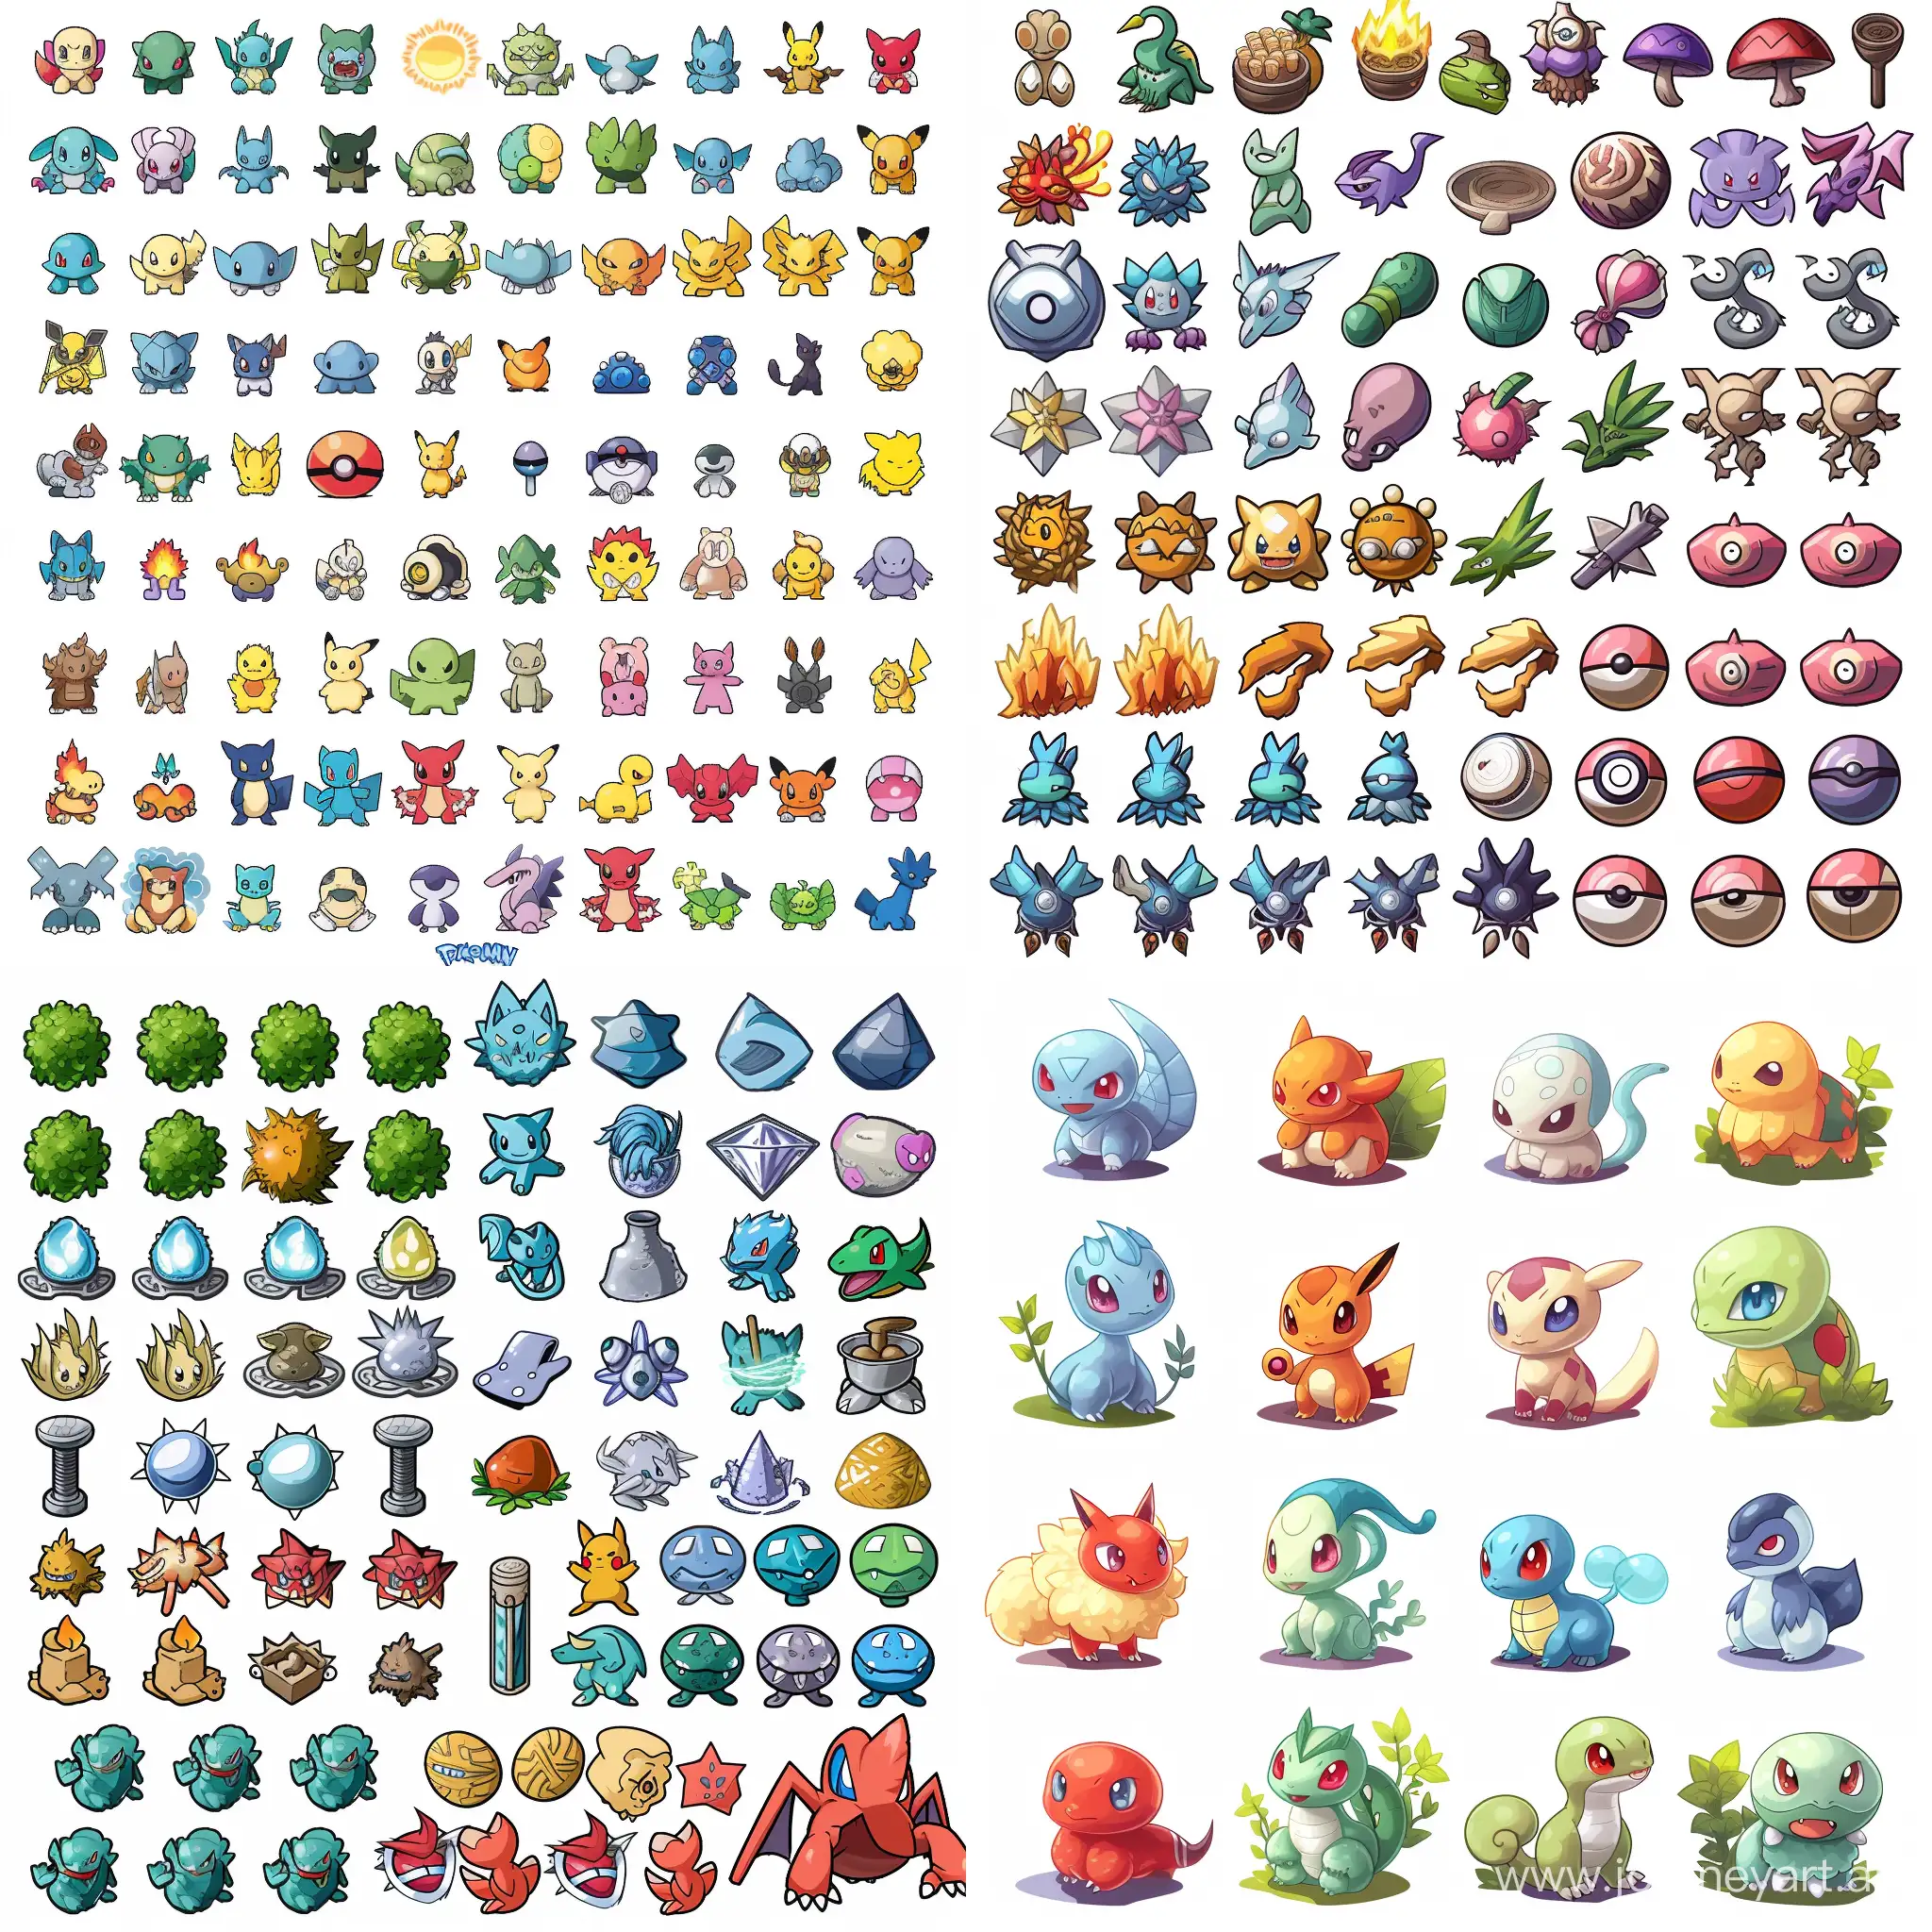 Vibrant-Pokmon-Sprite-Sheet-Including-90330-Different-Characters